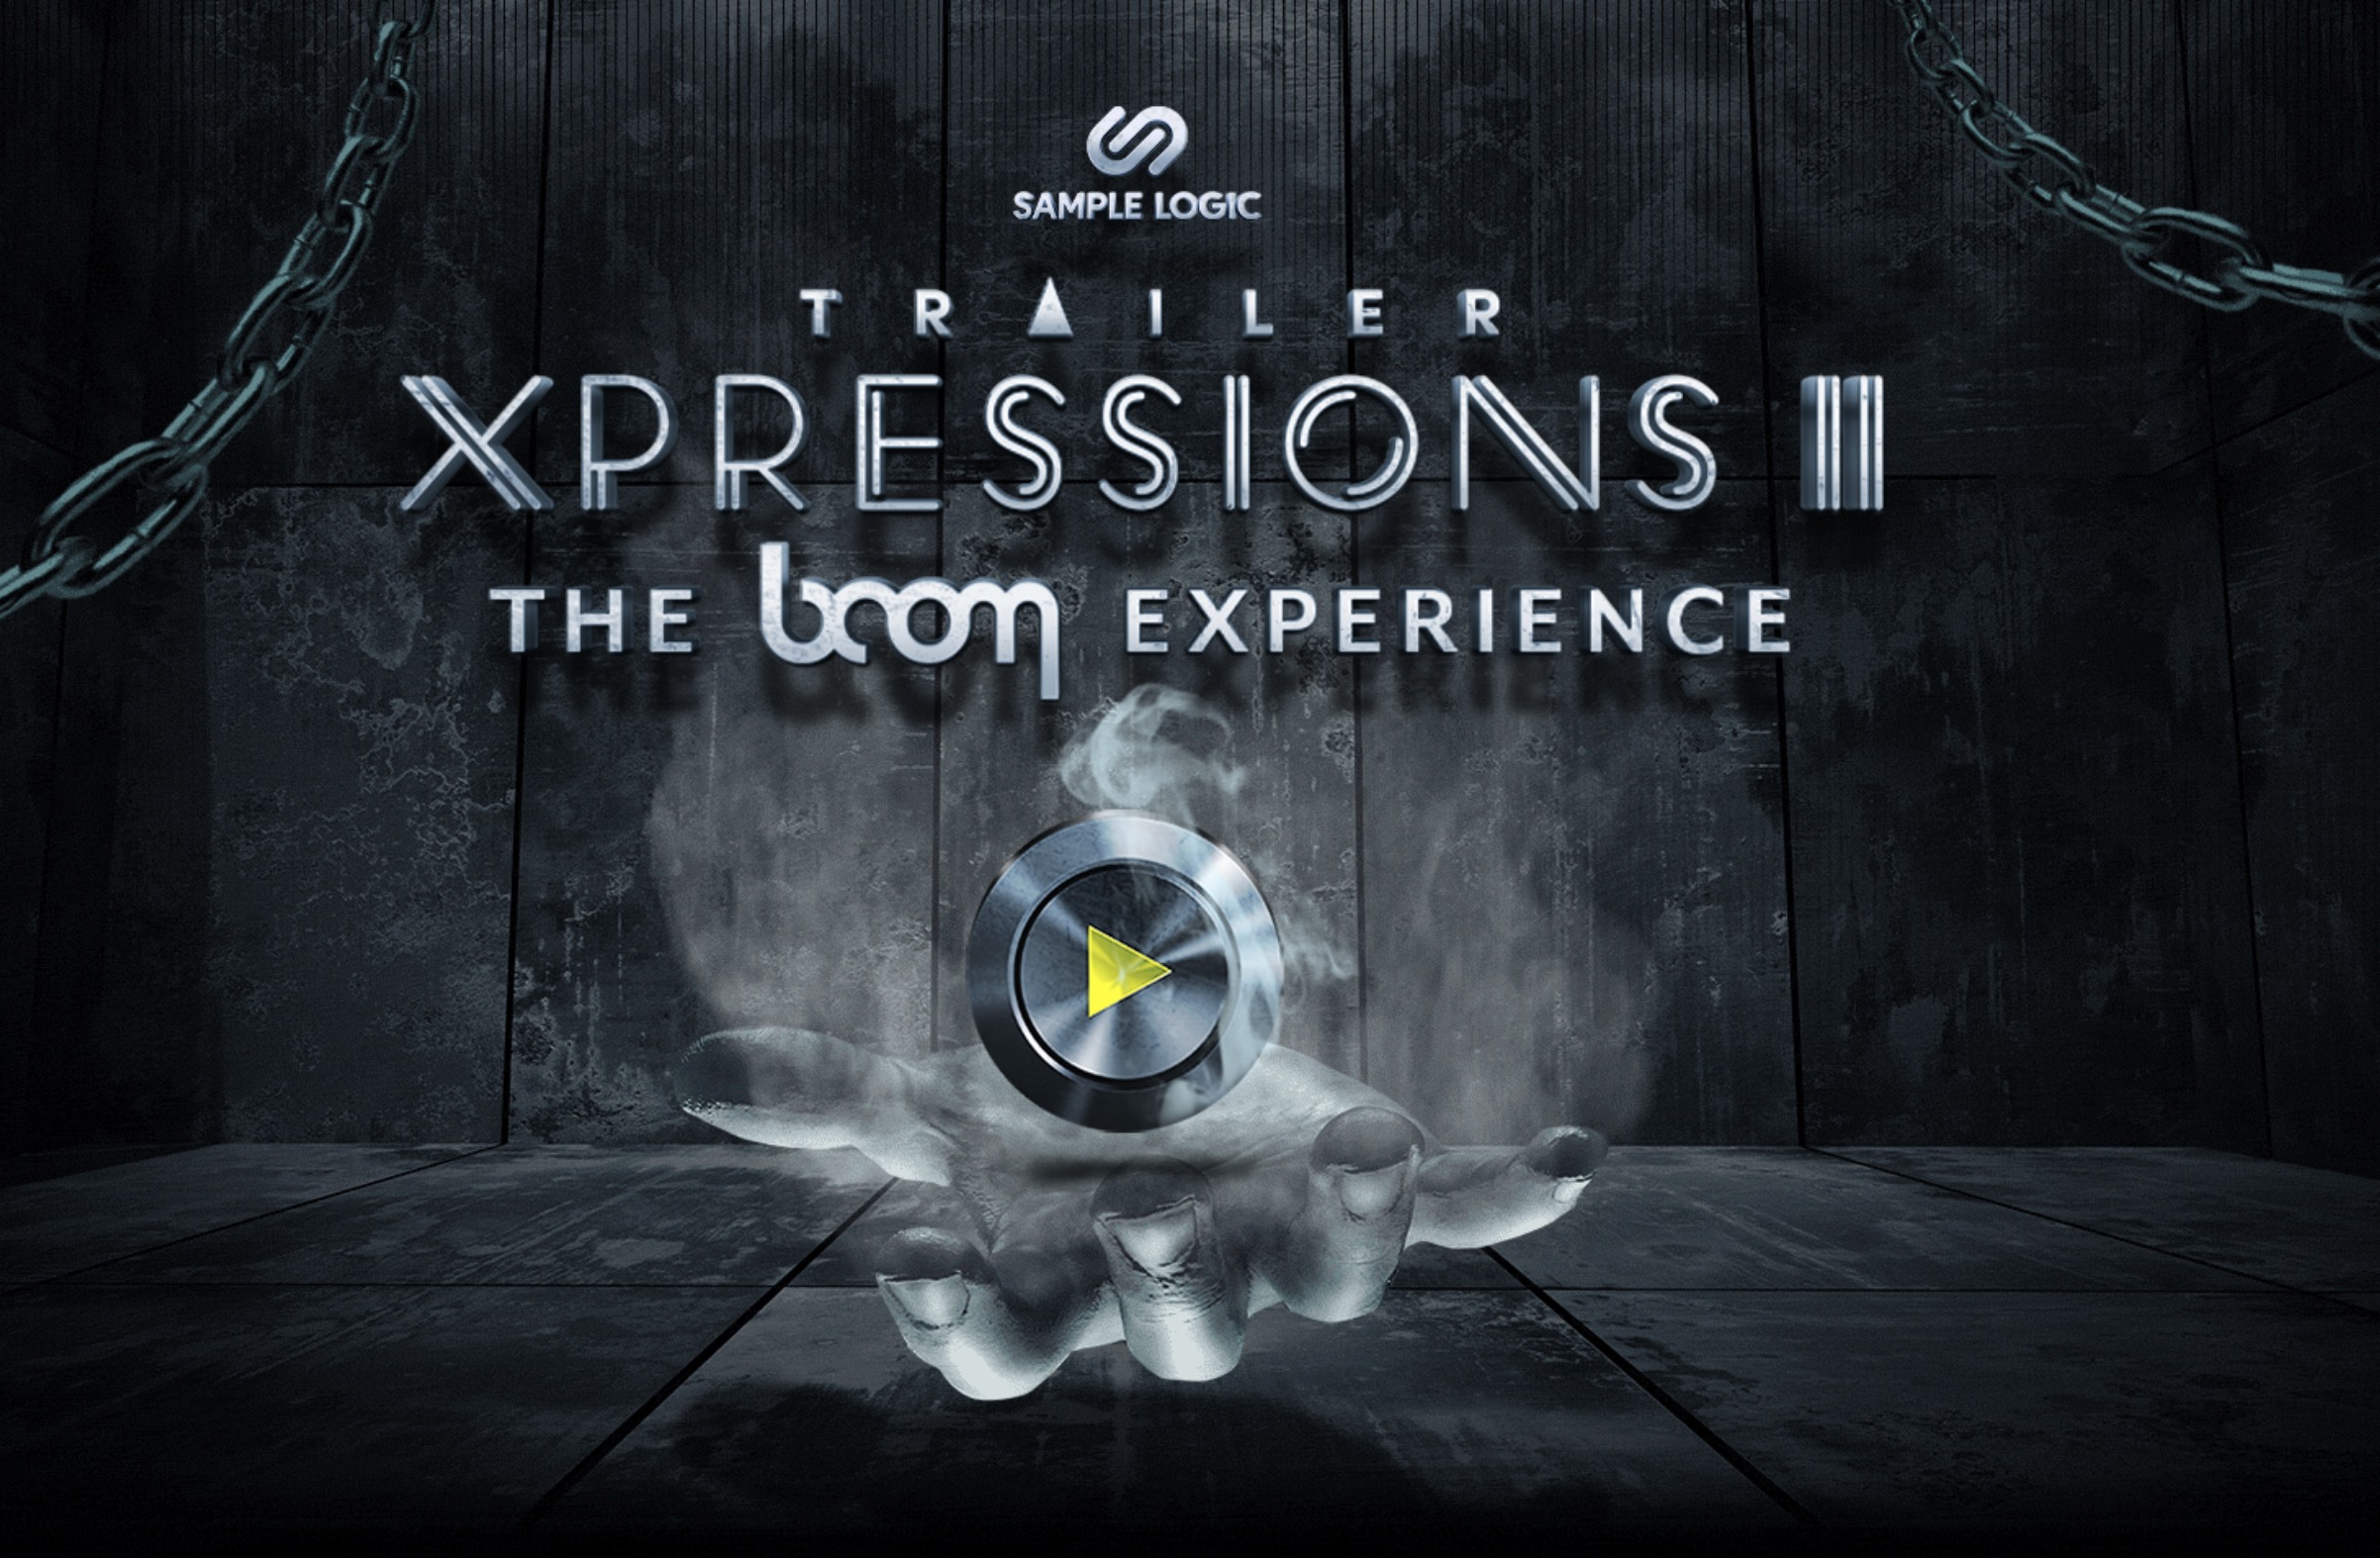 Trailer Xpressions II by Sample Logic Review Featured